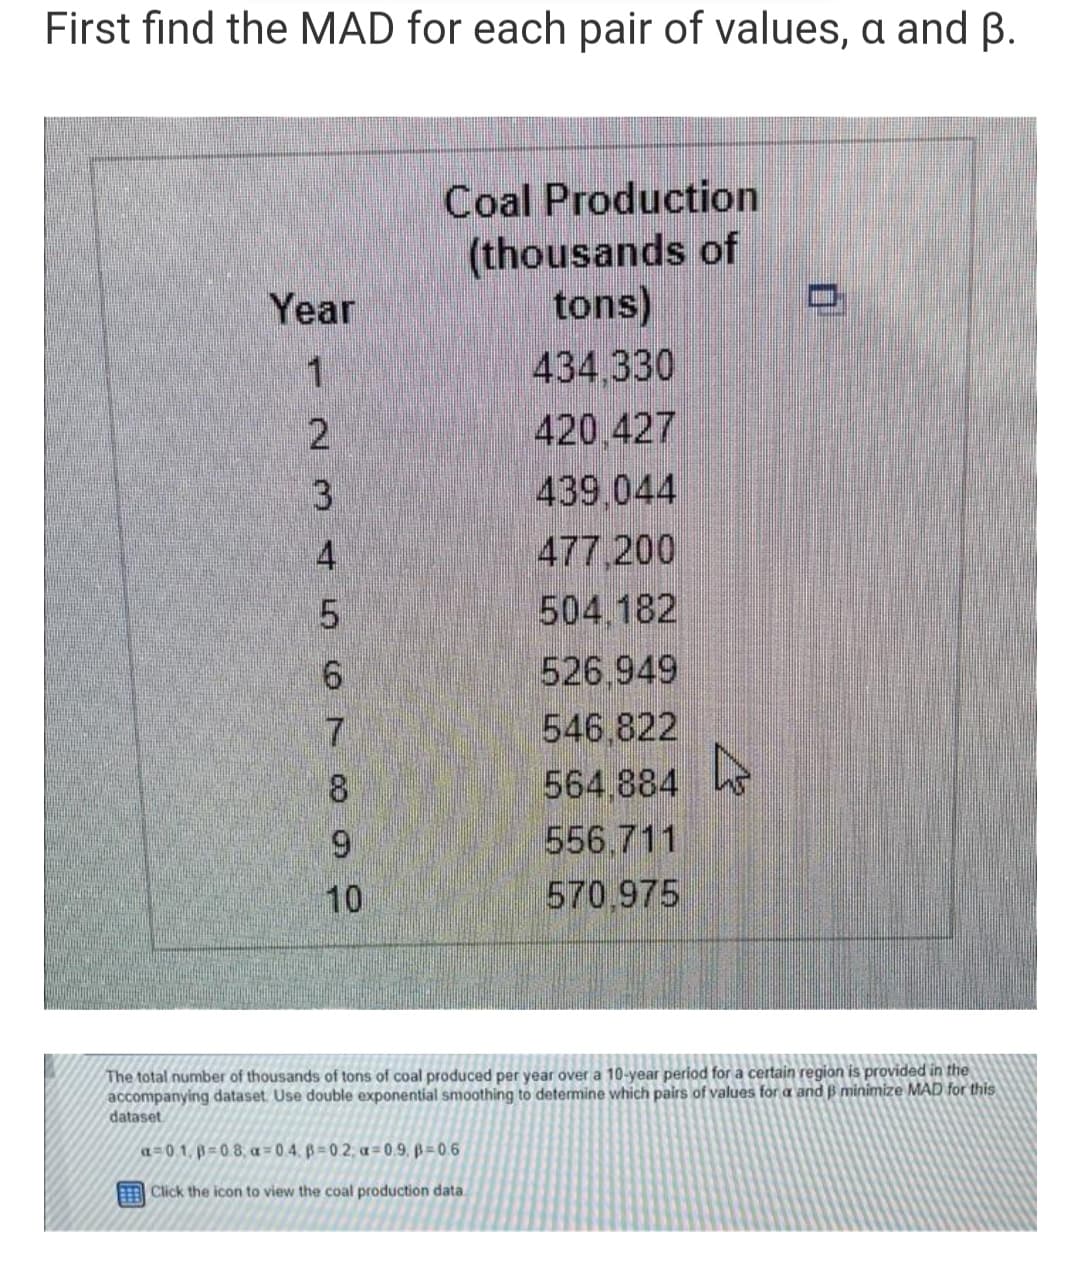 First find the MAD for each pair of values, a and ß.
Coal Production
(thousands of
tons)
434,330
Year
1.
420.427
3.
439,044
4
477 200
504.182
526.949
7.
546,822
564.884
556,711
8
10
570,975
The total number of thousands of tons of coal produced per year over a 10-year period for a certain region is provided in the
accompanying dataset. Use double exponential smoothing to determine which pairs of values for a and B minimize MAD for this
dataset
a=0.1, p=0.8, a = 0.4. B 0 2; a=0.9, = 0.6
Click the icon to view the coal production data
